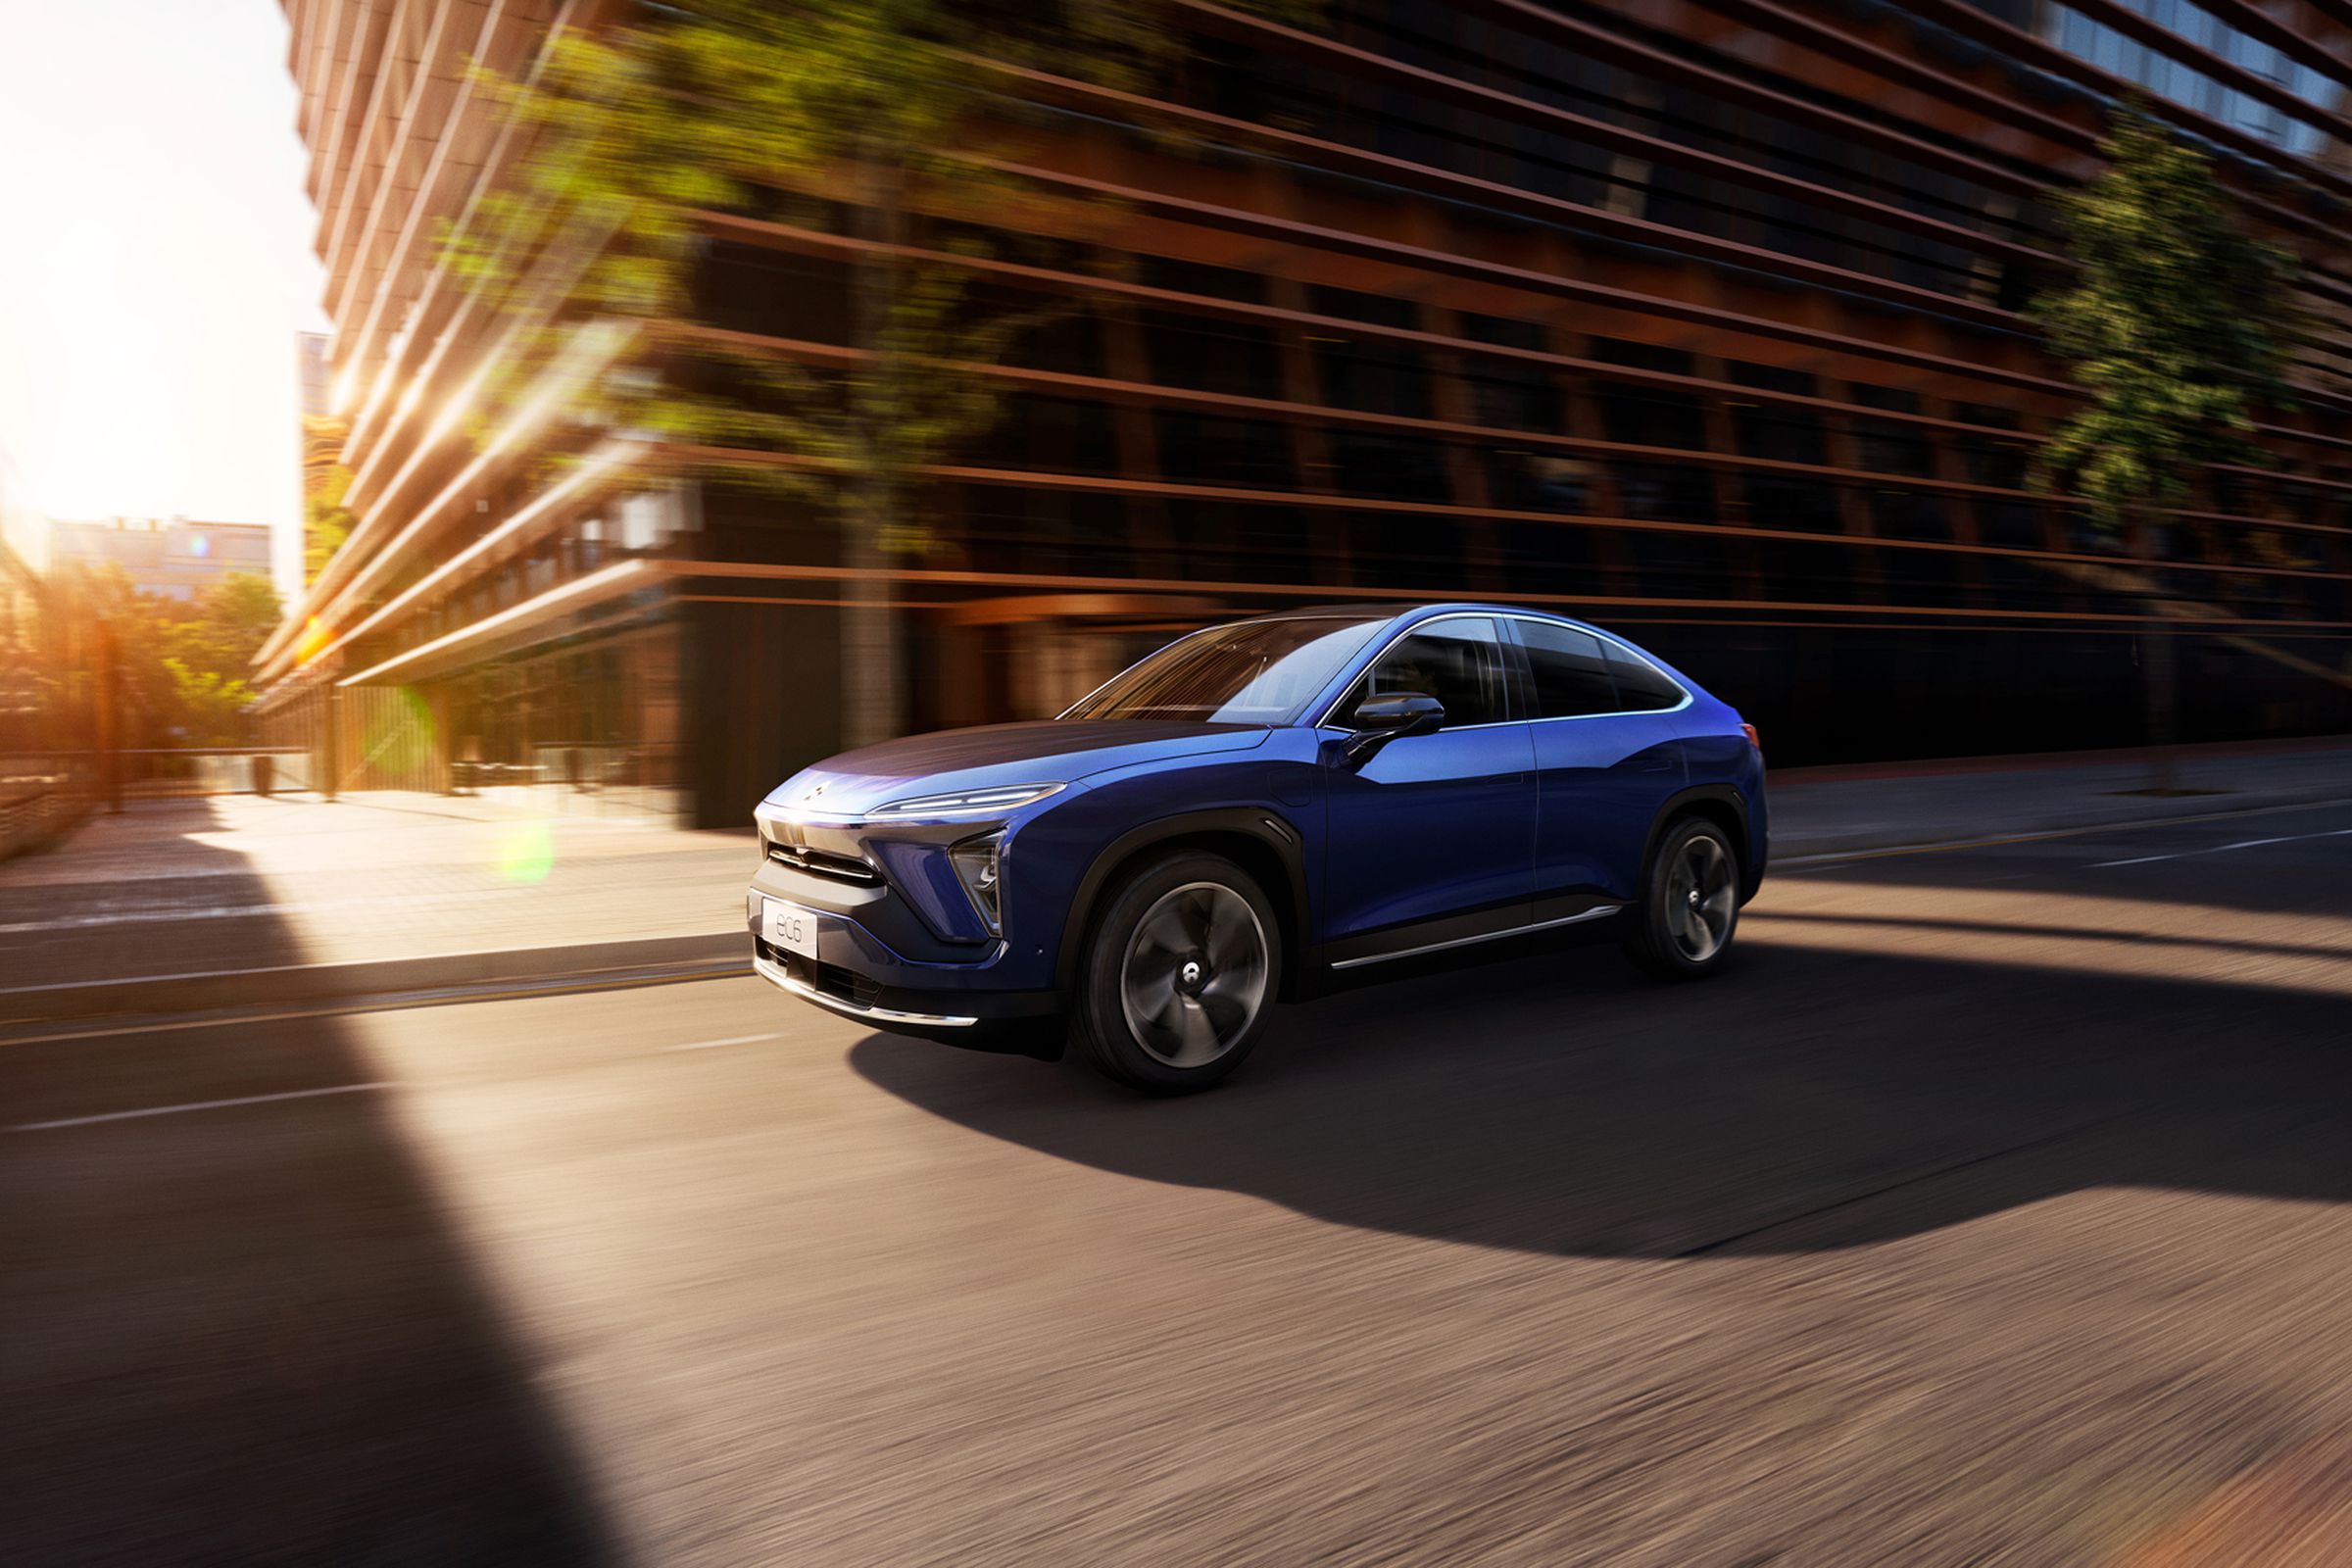 NIO’s new EC6 SUV, which is expected to hit the road in late 2020.﻿